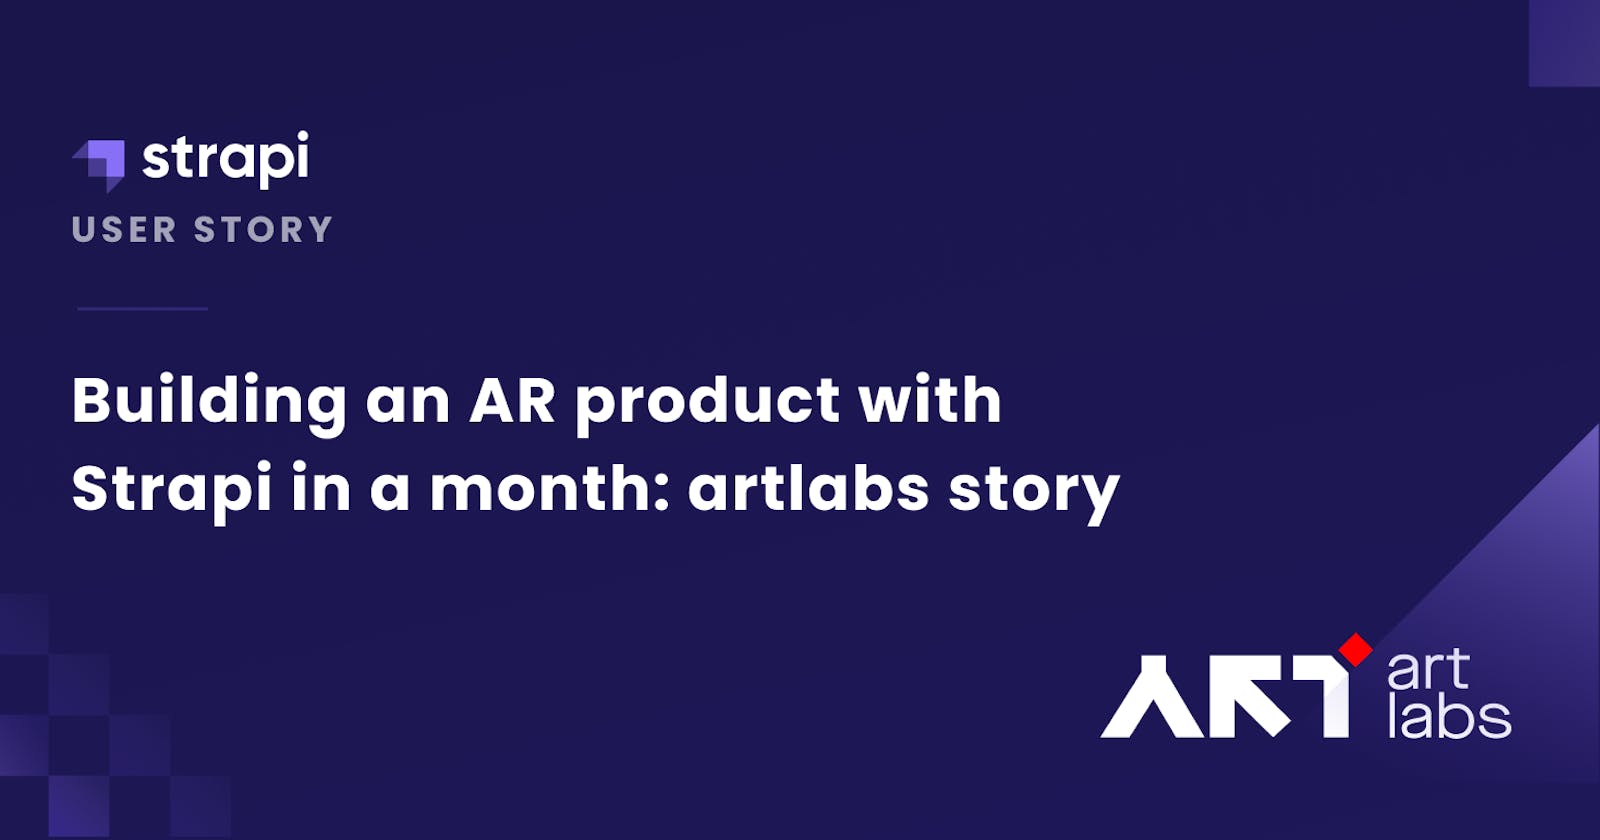 Building an AR product with Strapi in a month: artlabs story